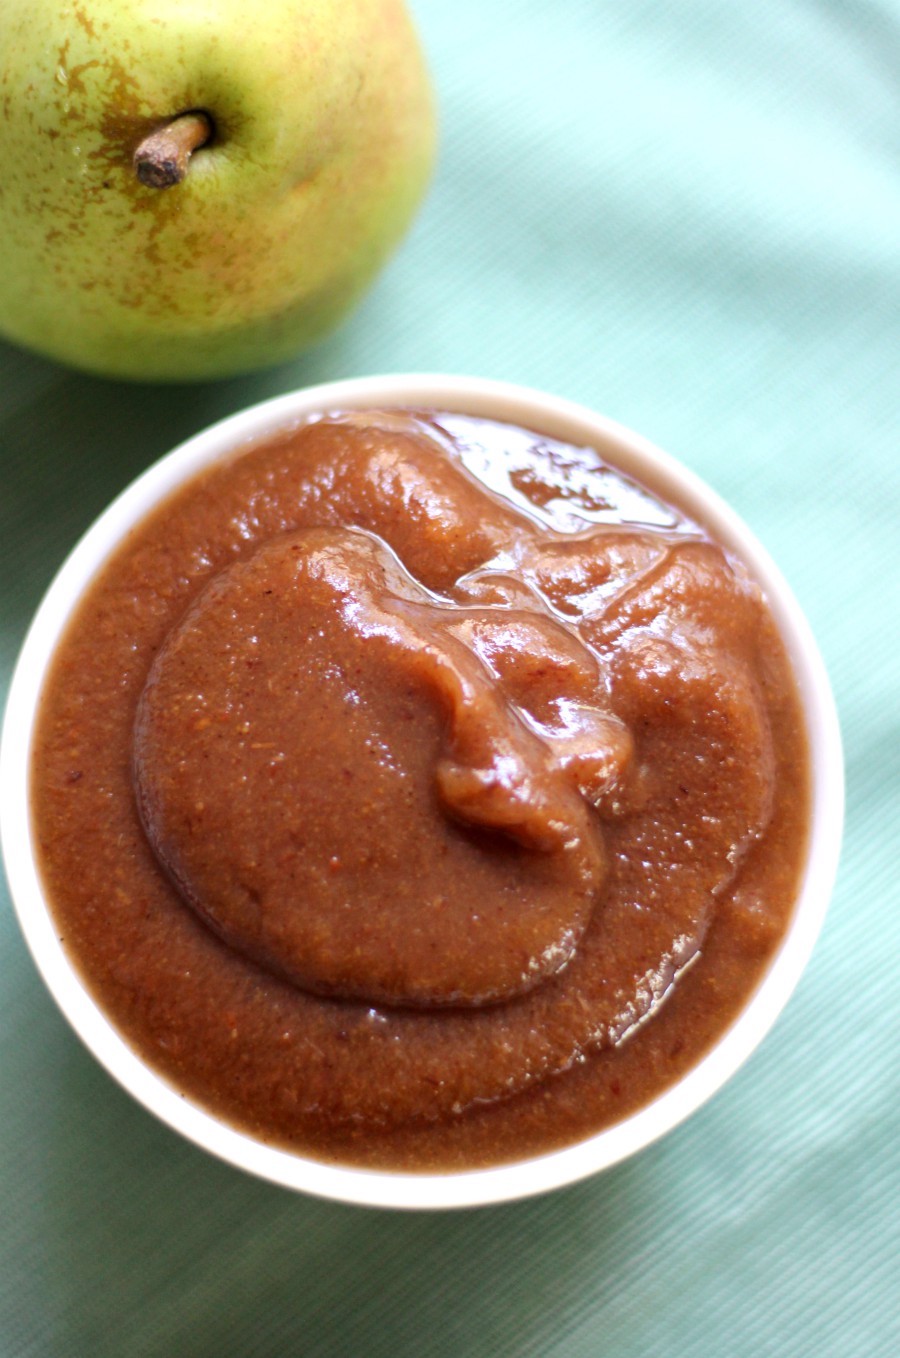 Slow Cooker Pear Butter (Gluten-Free, Vegan, Paleo) | Strength and Sunshine @RebeccaGF666 Smooth, creamy, and sweet Slow Cooker Pear Butter that's so simple to make! Your favorite combination of pears cooked down in the crock-pot for a perfectly sweet and aromatic spread recipe that's gluten-free, vegan, paleo, and allergy-free! #pearbutter #slowcooker #crockpot